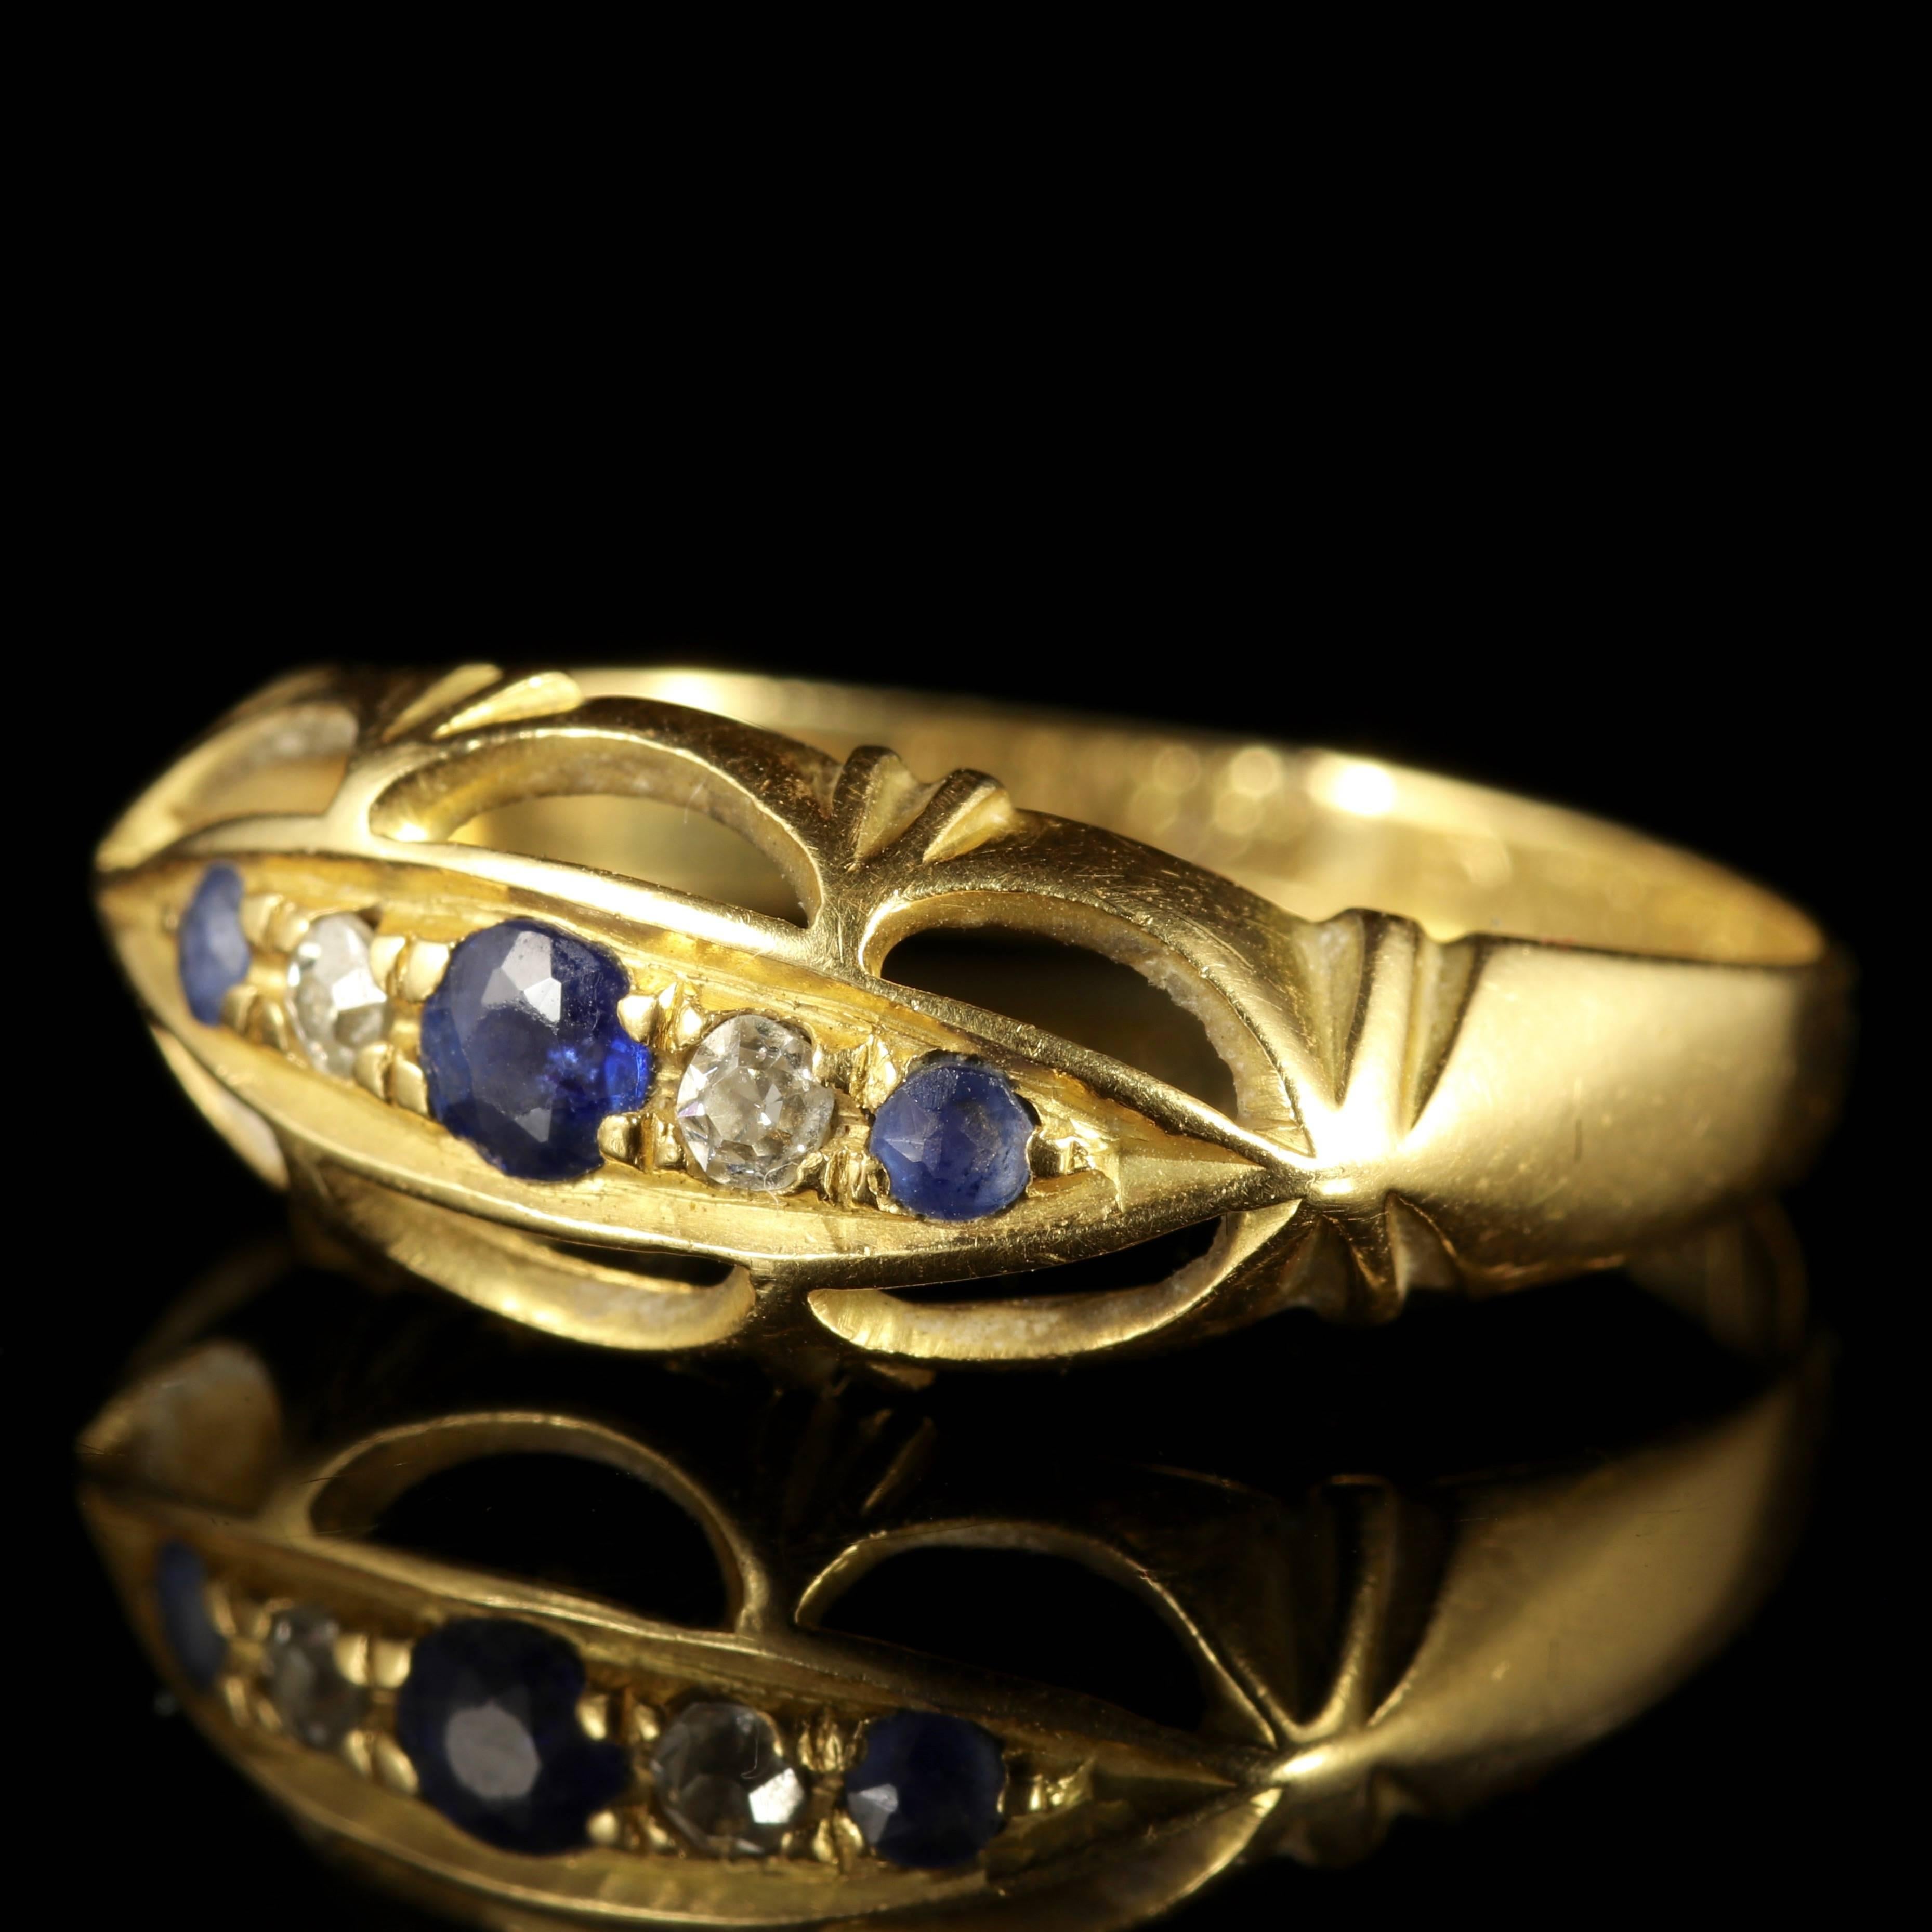 To read more please click continue reading below-

This lovely Sapphire and Diamond ring is fully hallmarked Birmingham 1915.

the ring boasts a trilogy of rich blue Sapphires and two sparkling Diamonds. 

Sapphire is the symbol of feelings of